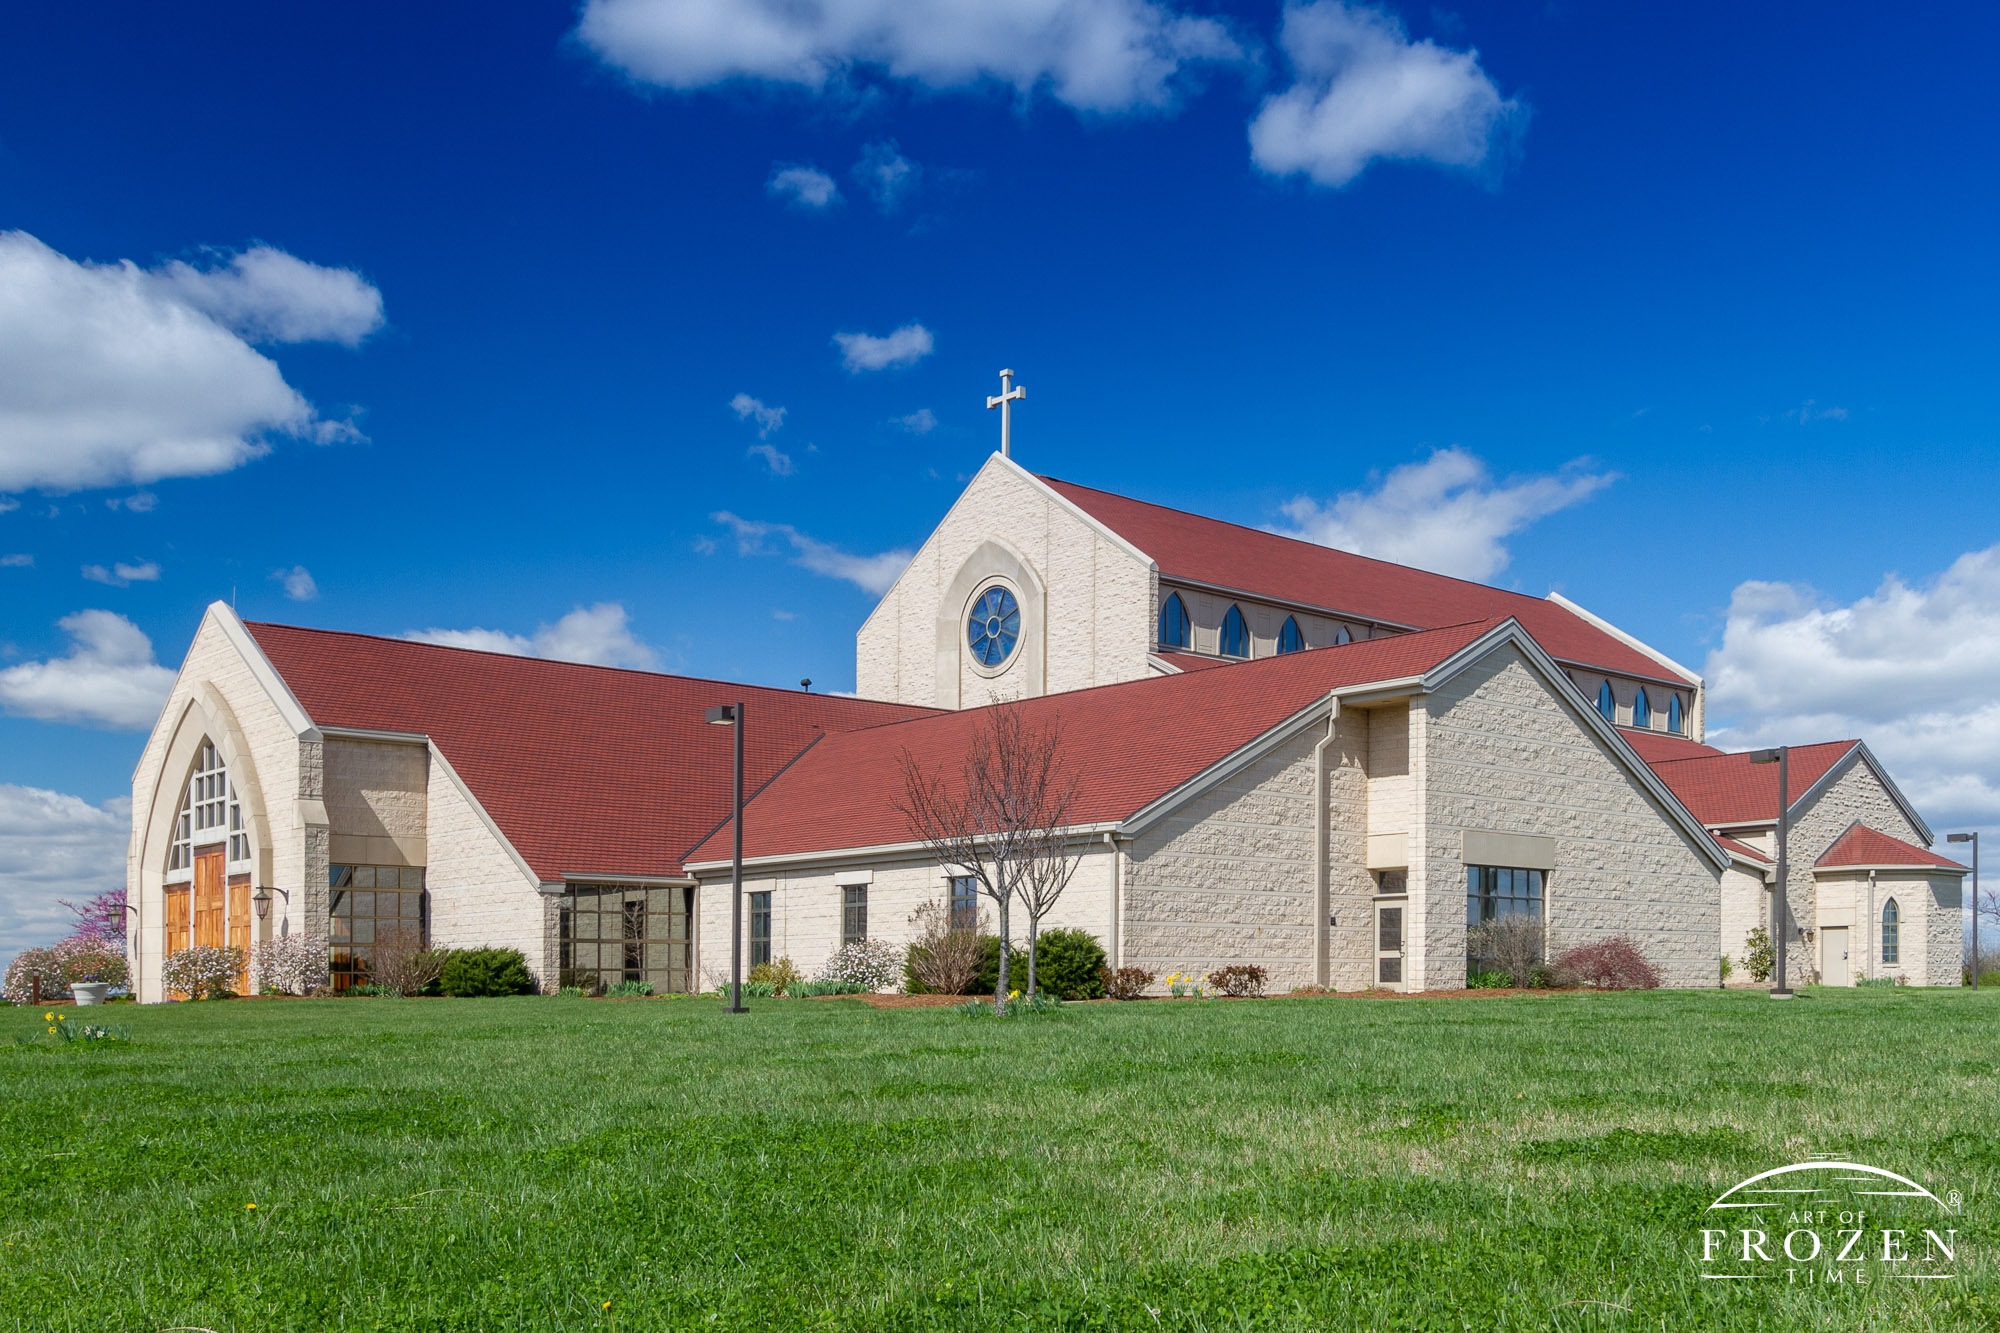 The outdoor view of St. Clare of Assisi, in O’Fallon Illinois on a blue sky in early Spring